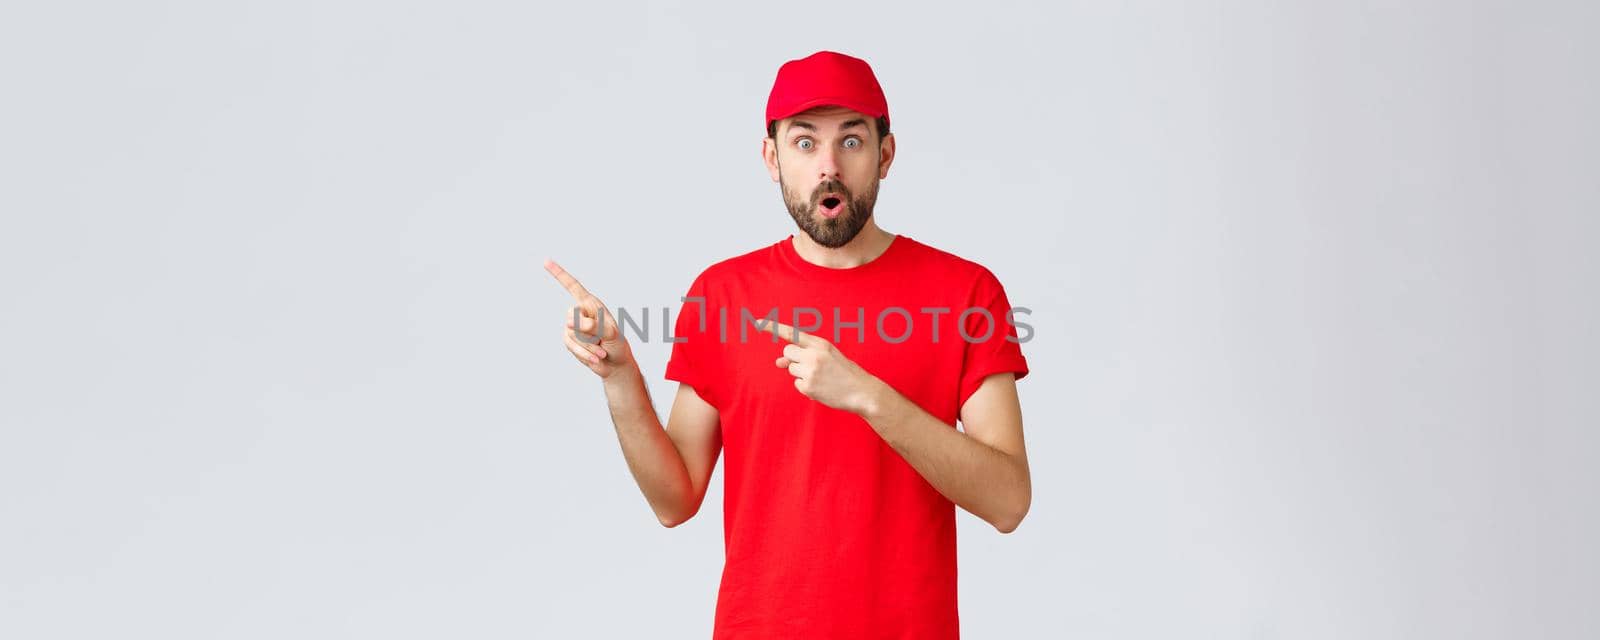 Online shopping, delivery during quarantine and takeaway concept. Shocked and impressed, gasping courier in red t-shirt and cap, uniform of service company, pointing fingers left astonished.